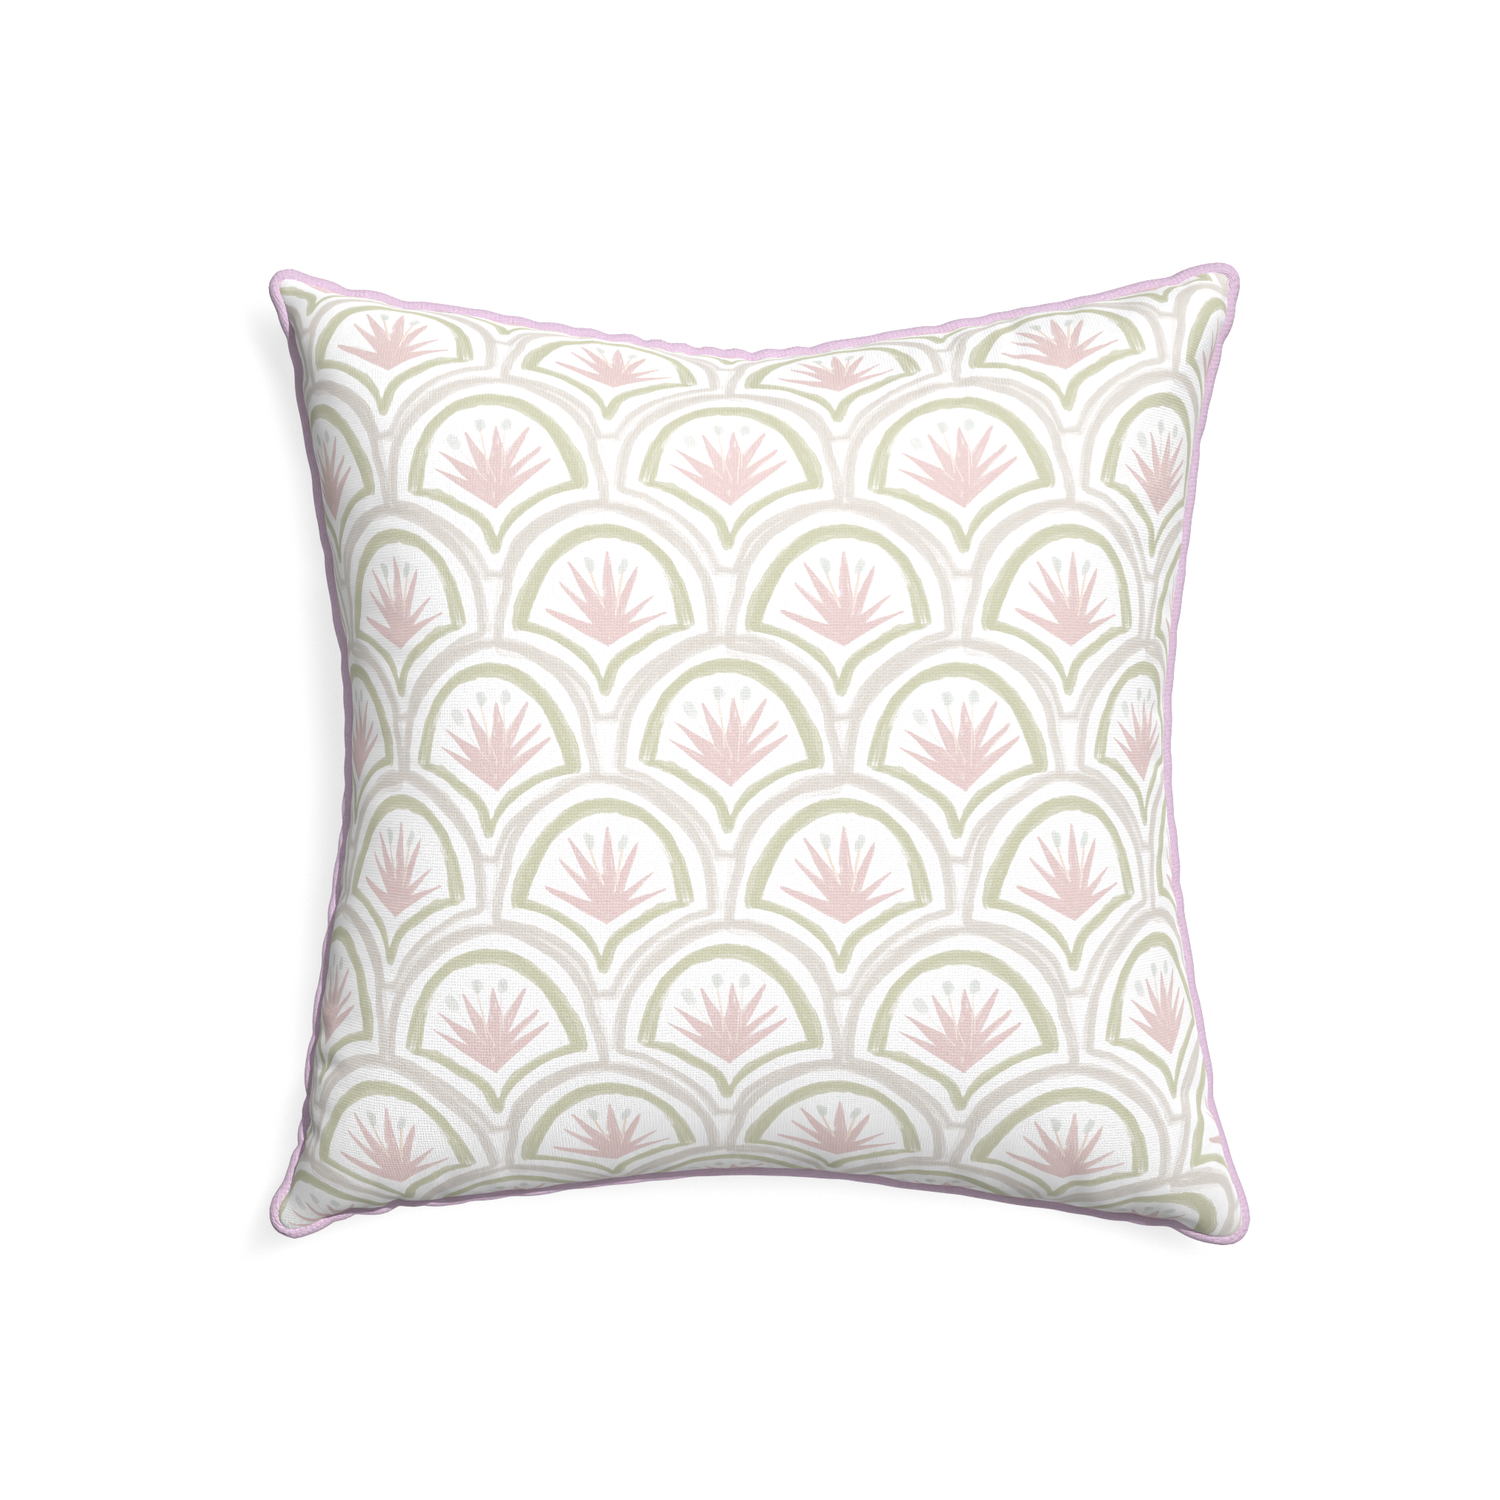 22-square thatcher rose custom pillow with l piping on white background